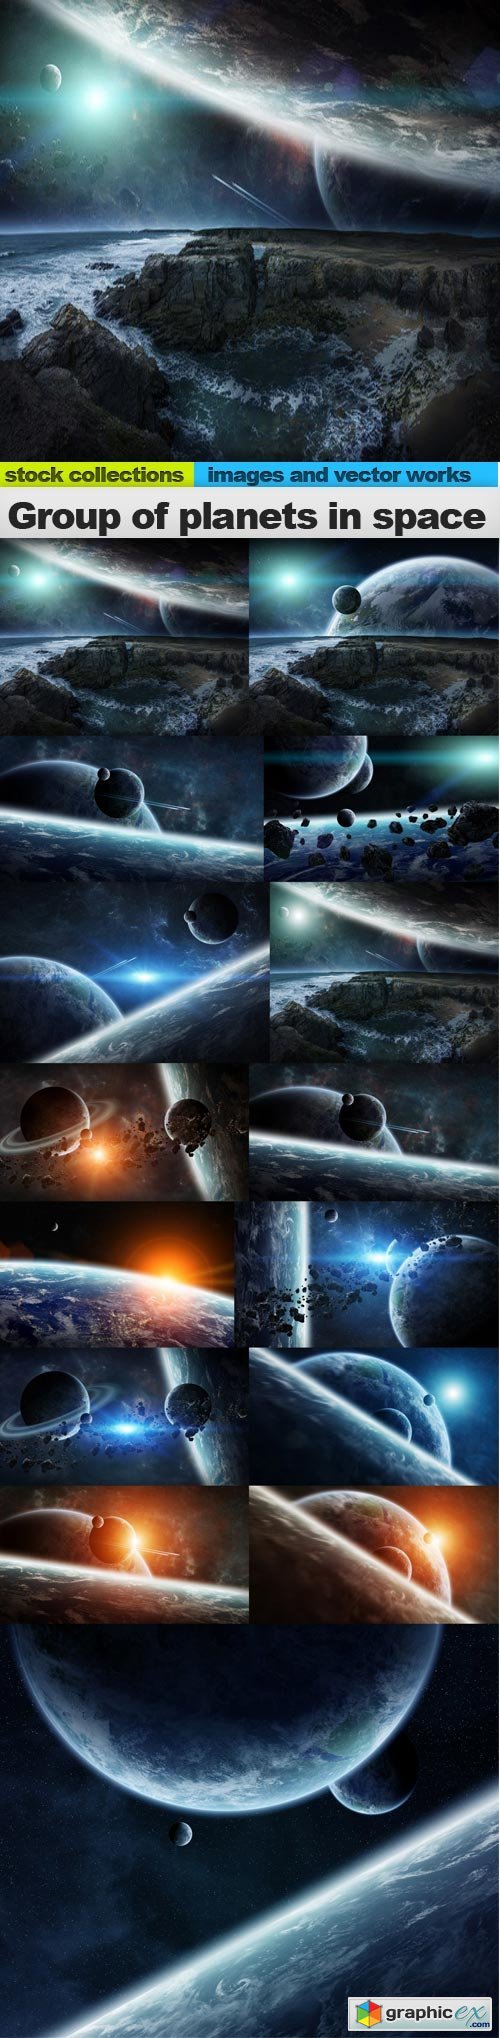 Group of planets in space, 15 x UHQ JPEG